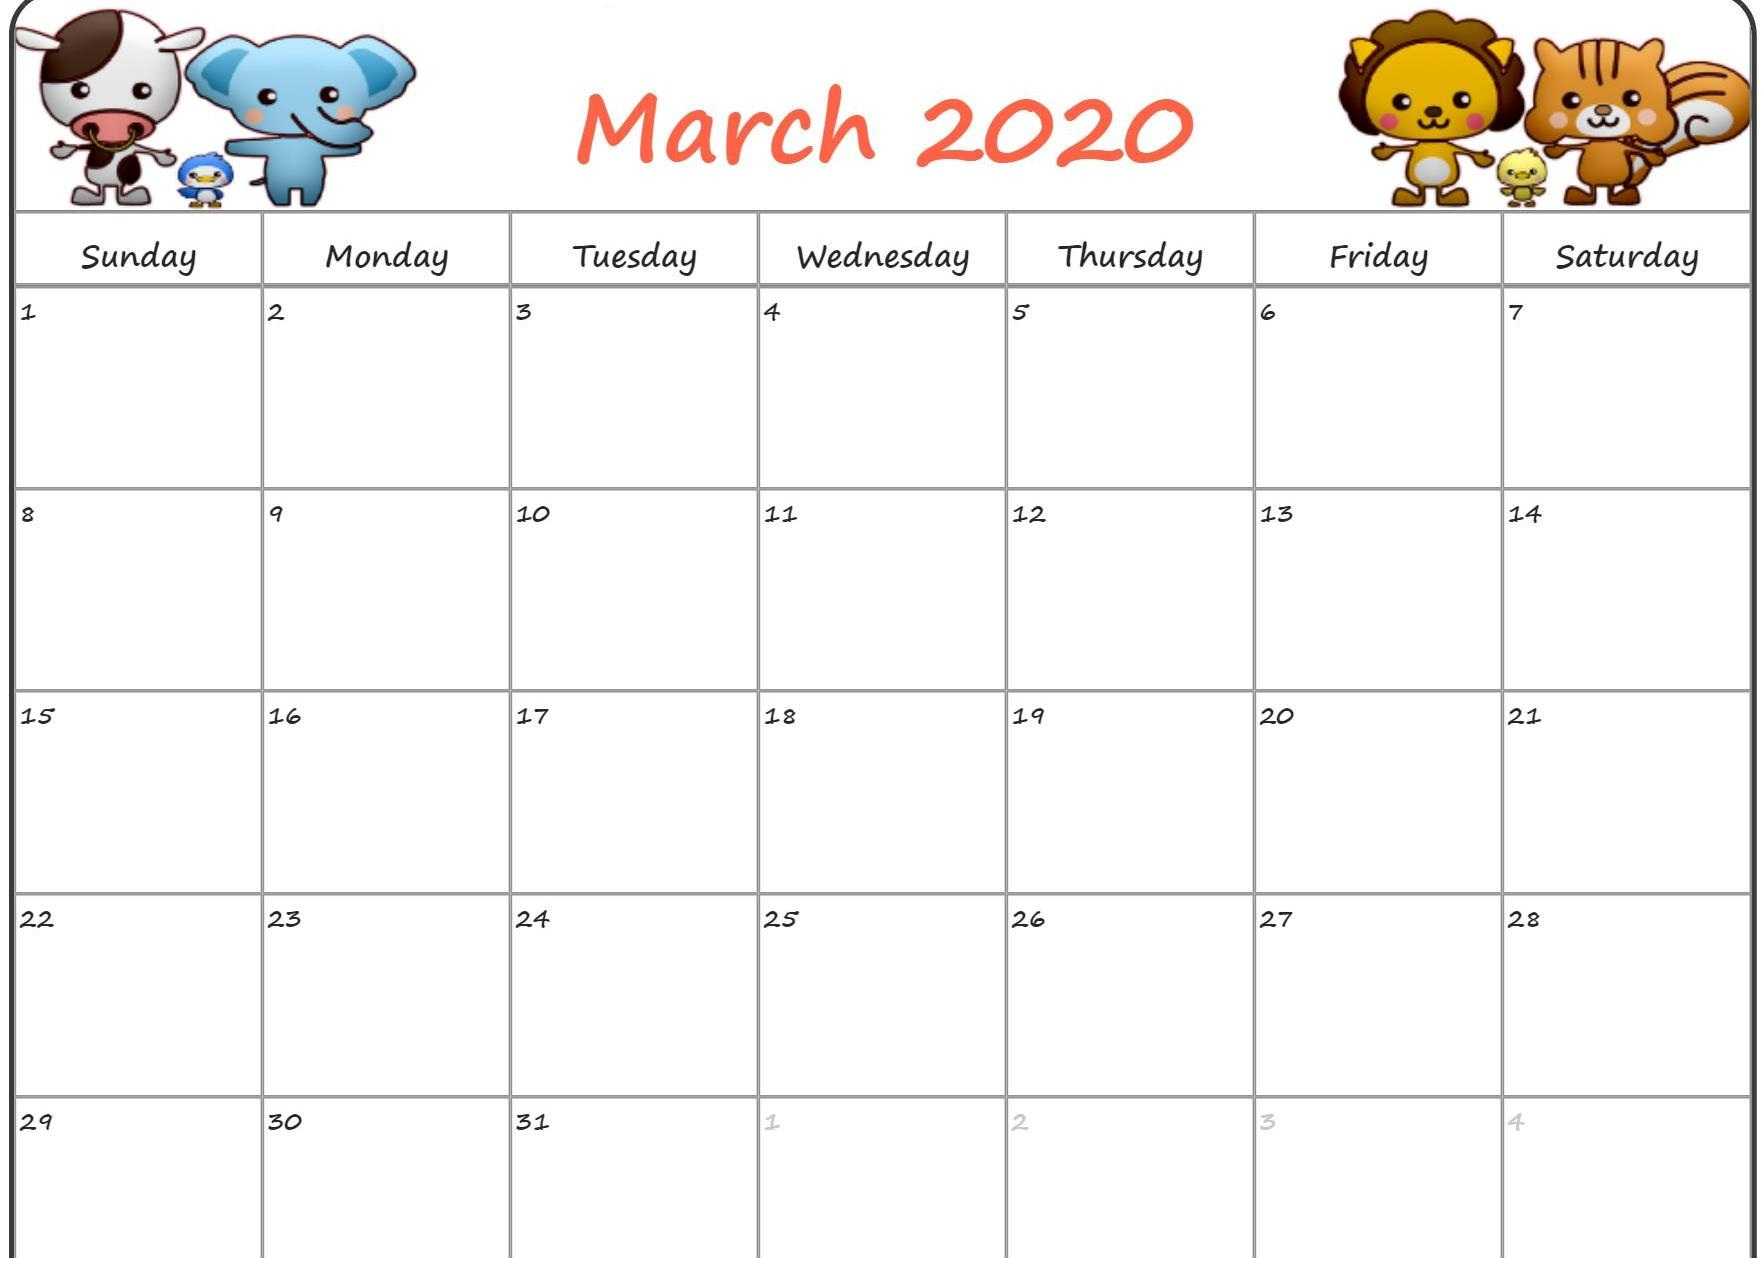 March 2020 Calendar Pdf Free For Daily Use | Free Printable Inside Blank Calendar Template For Kids